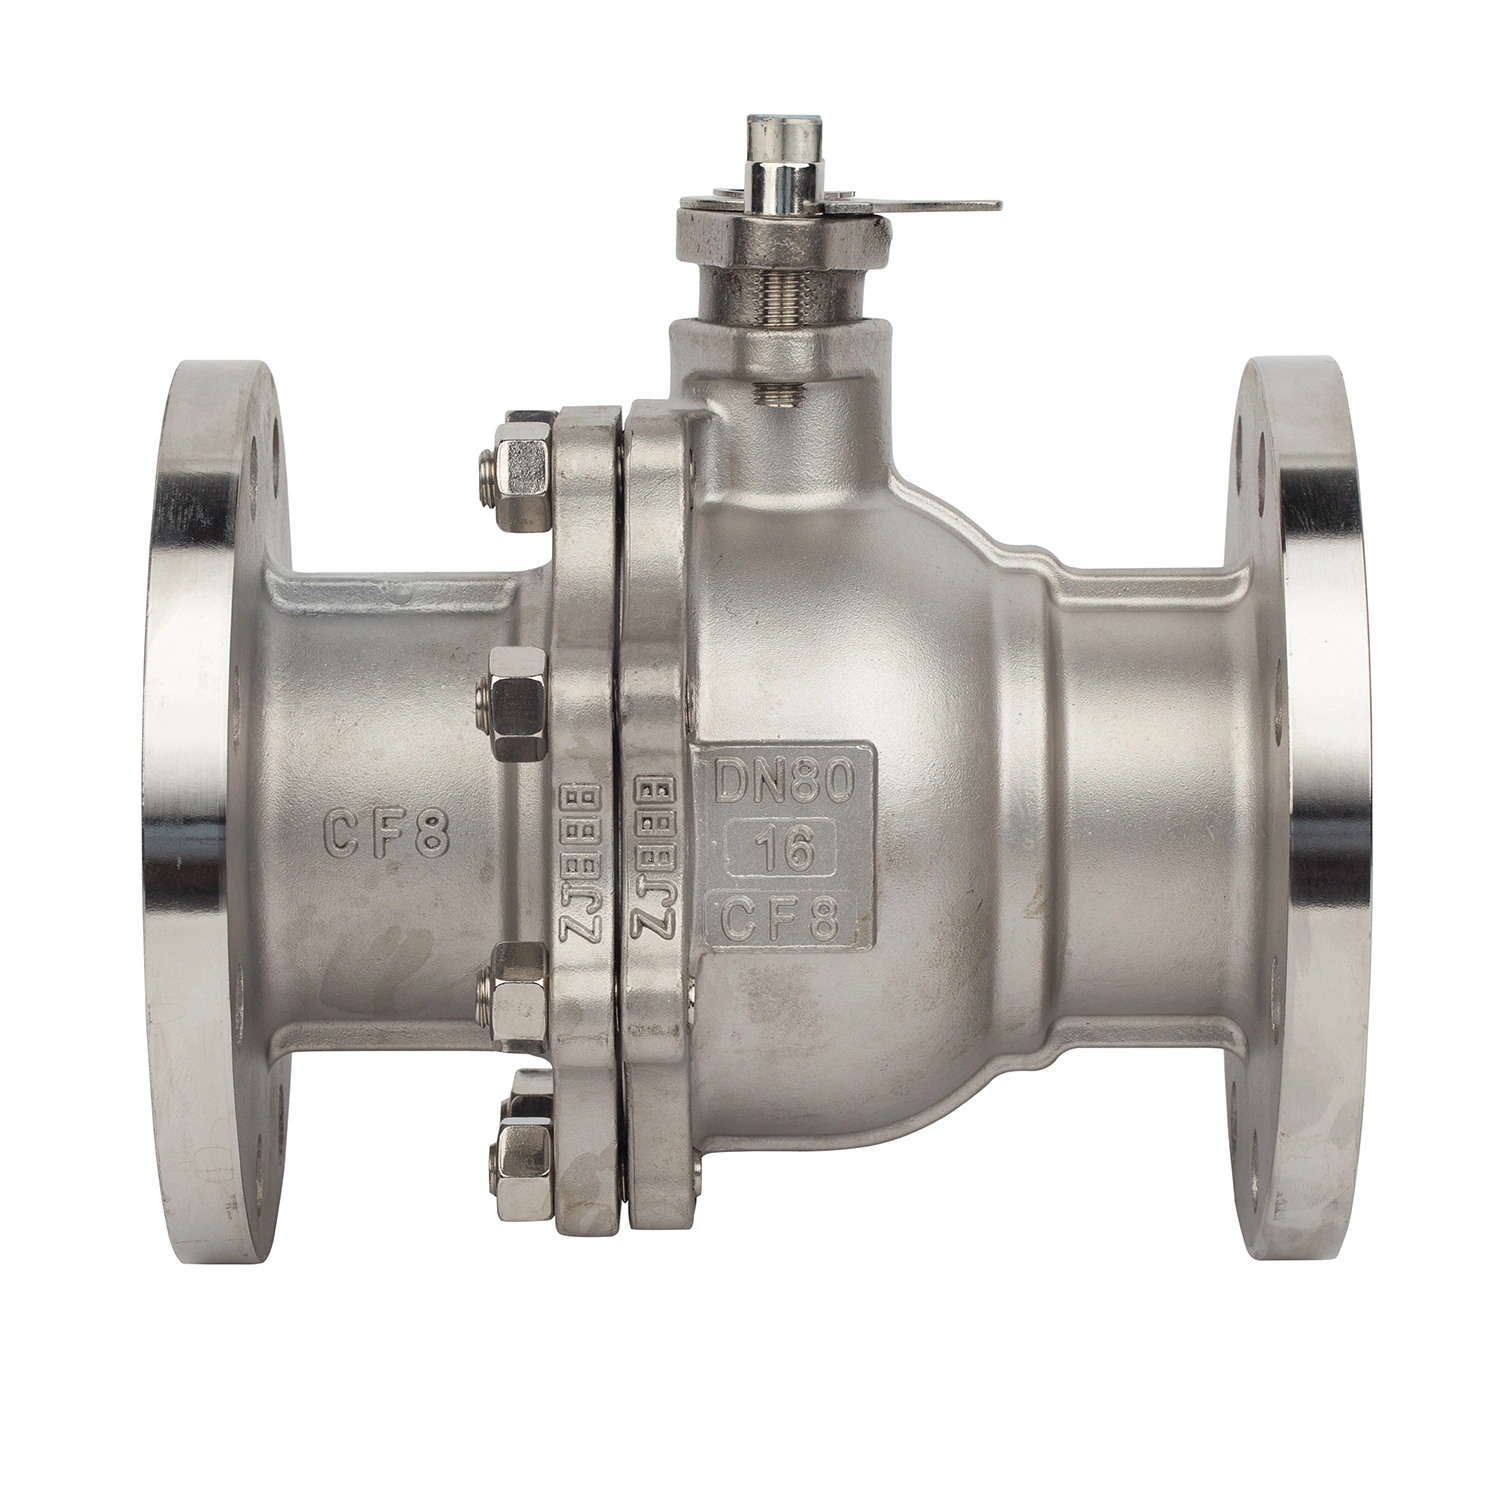 API/JIS/DIN 2PC Flange&Threaded Ball Valve Carbon Steel&Stainless Steel Ball Valve Floating&Trunnion Ball Valve Pneumatic/Electric Ball Valve Fire Safety